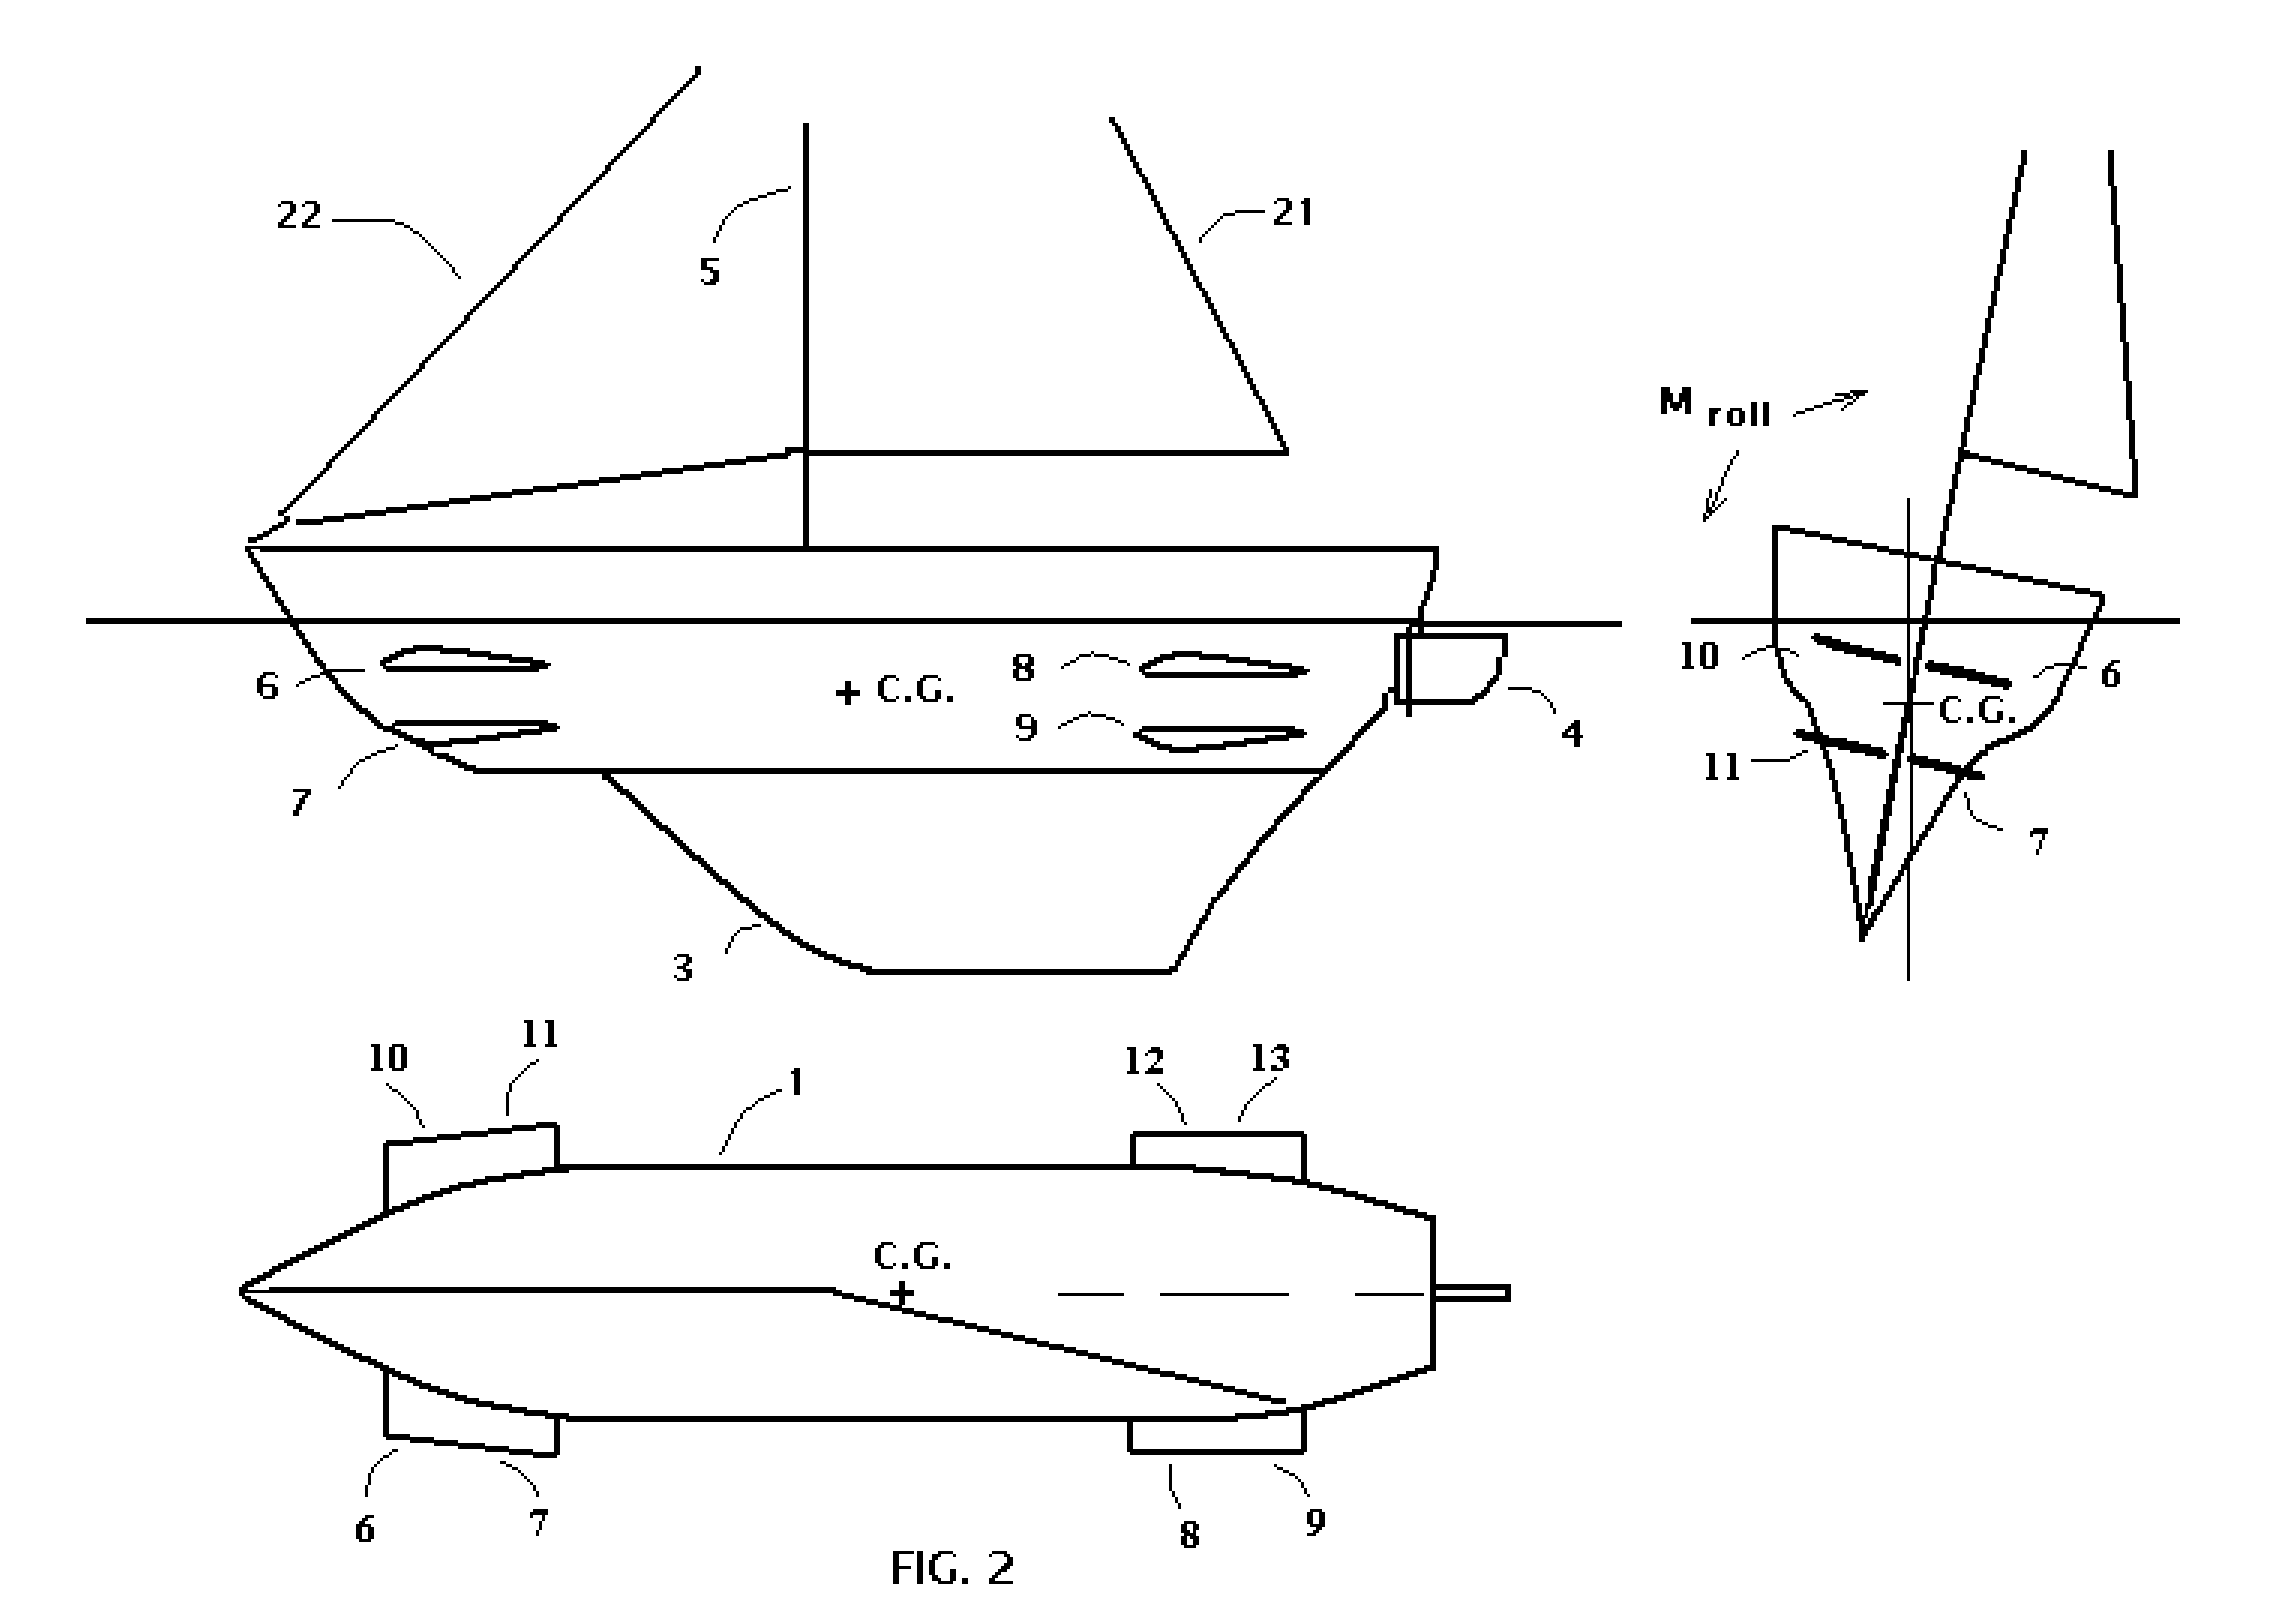 Hydrofoil stabilizer of list, pitch and roll for sail vessels